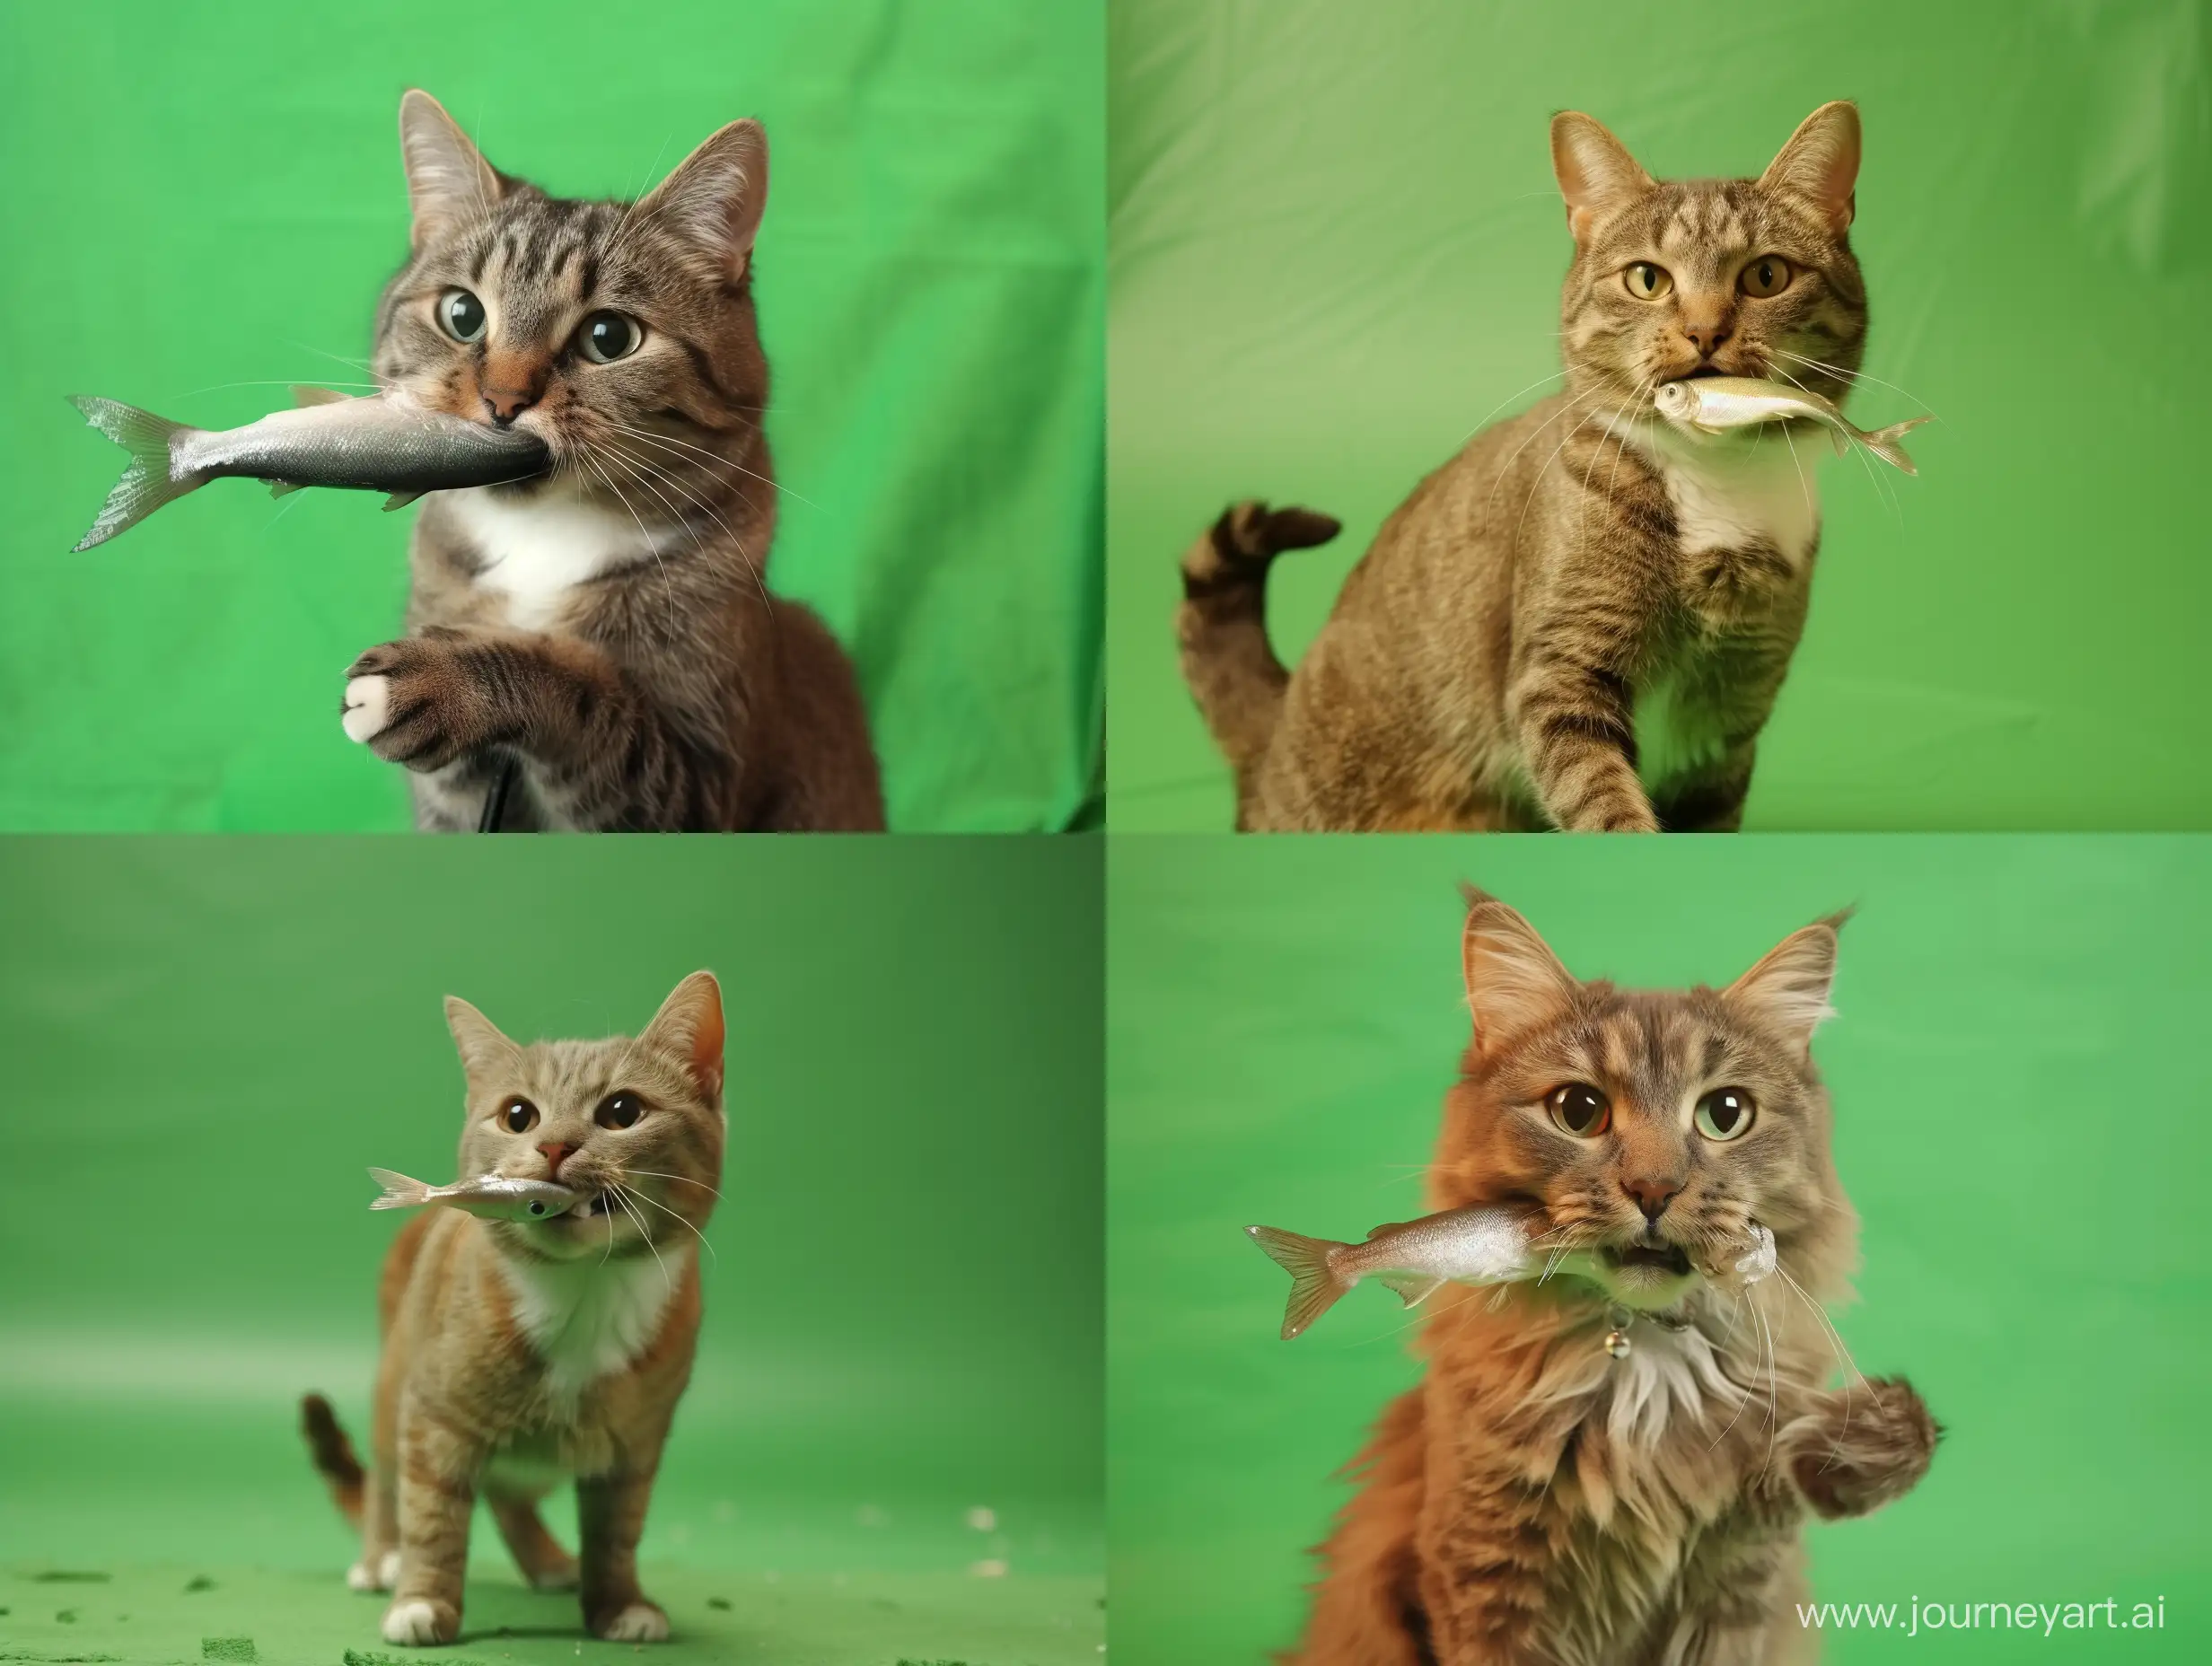 Playful-Cat-Holding-a-Fish-on-Green-Screen